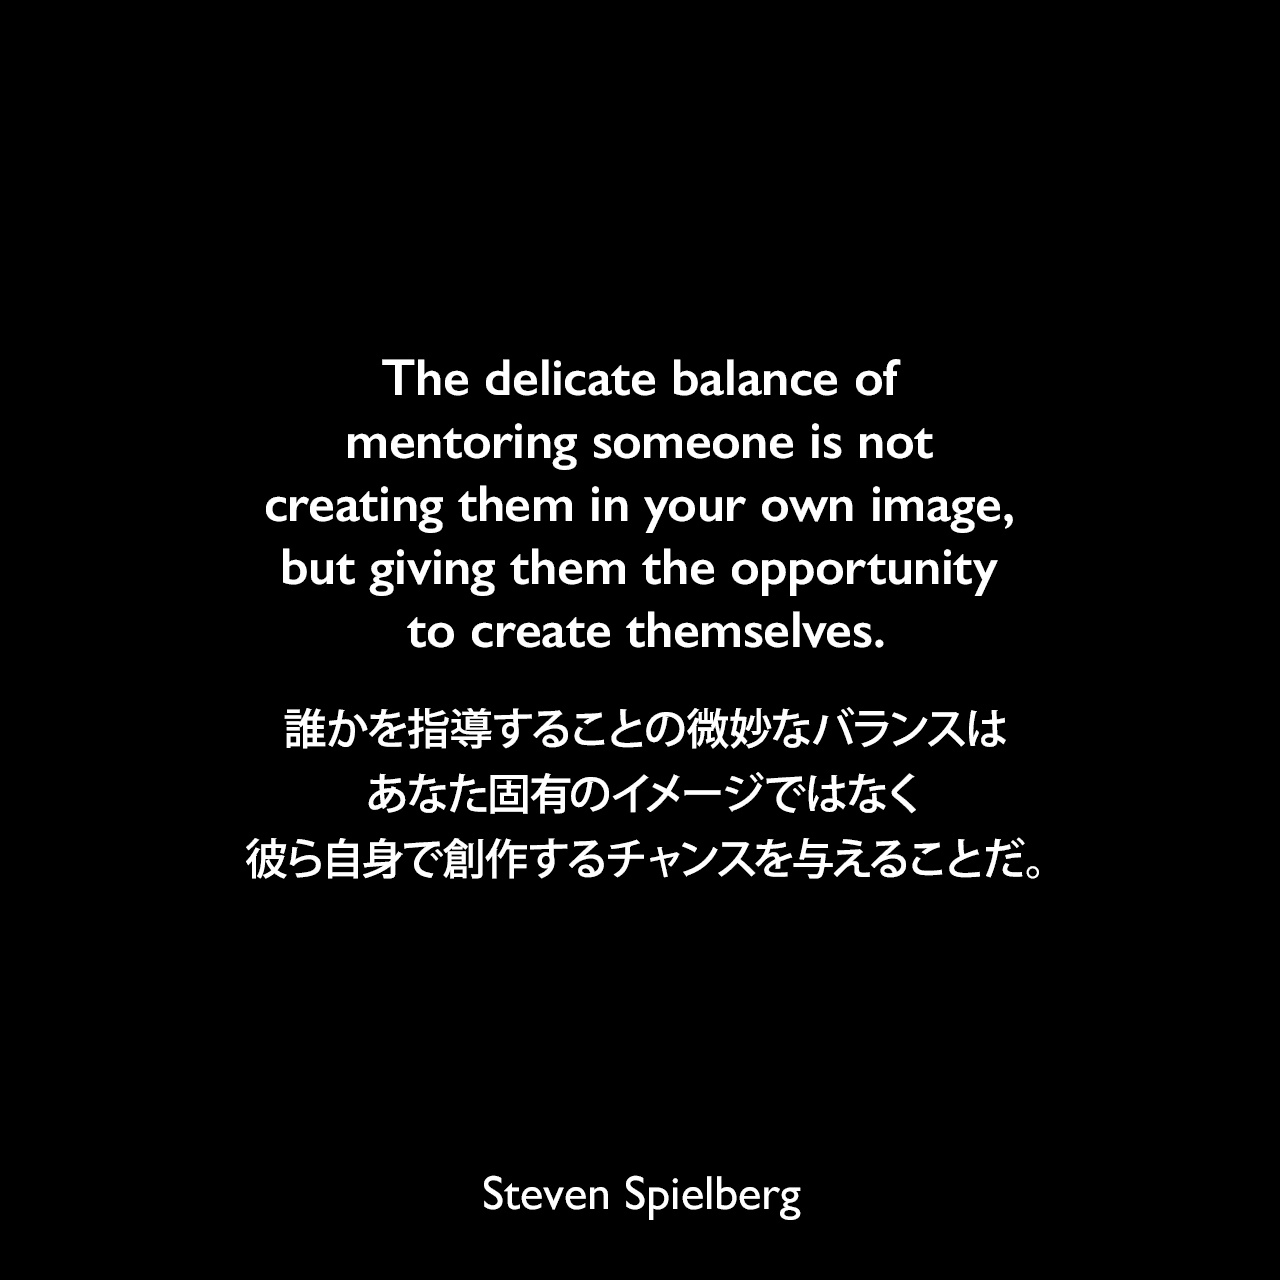 The delicate balance of mentoring someone is not creating them in your own image, but giving them the opportunity to create themselves.誰かを指導することの微妙なバランスは、あなた固有のイメージではなく、彼ら自身で創作するチャンスを与えることだ。Steven Spielberg